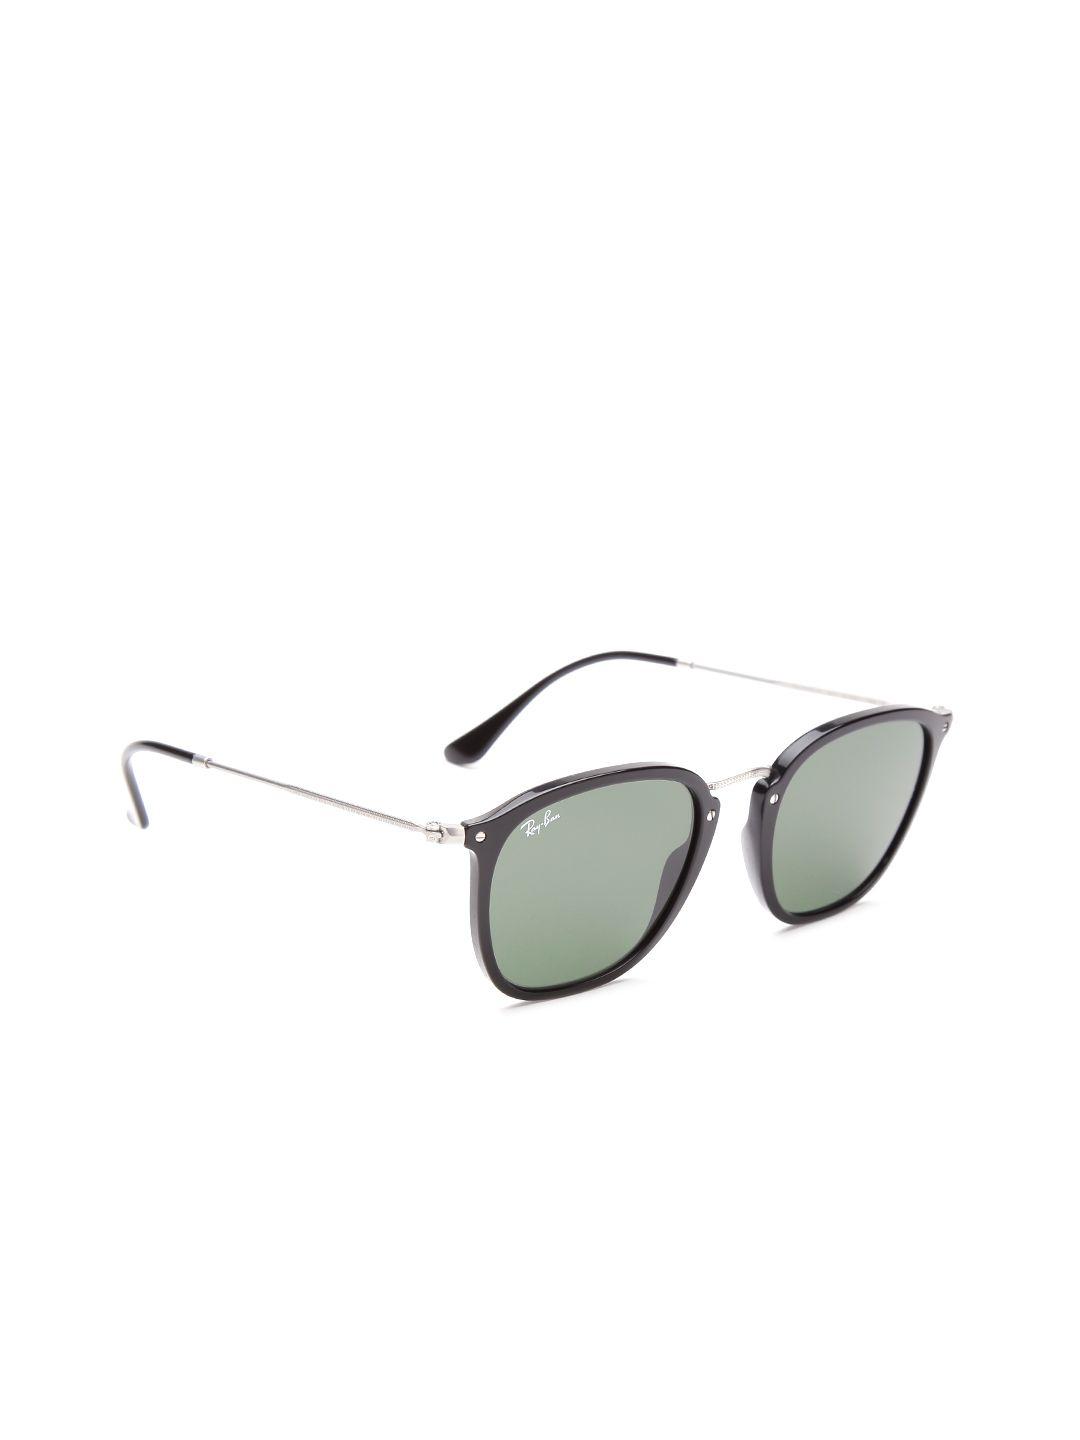 ray-ban-unisex-square-sunglasses-0rb2448n90151